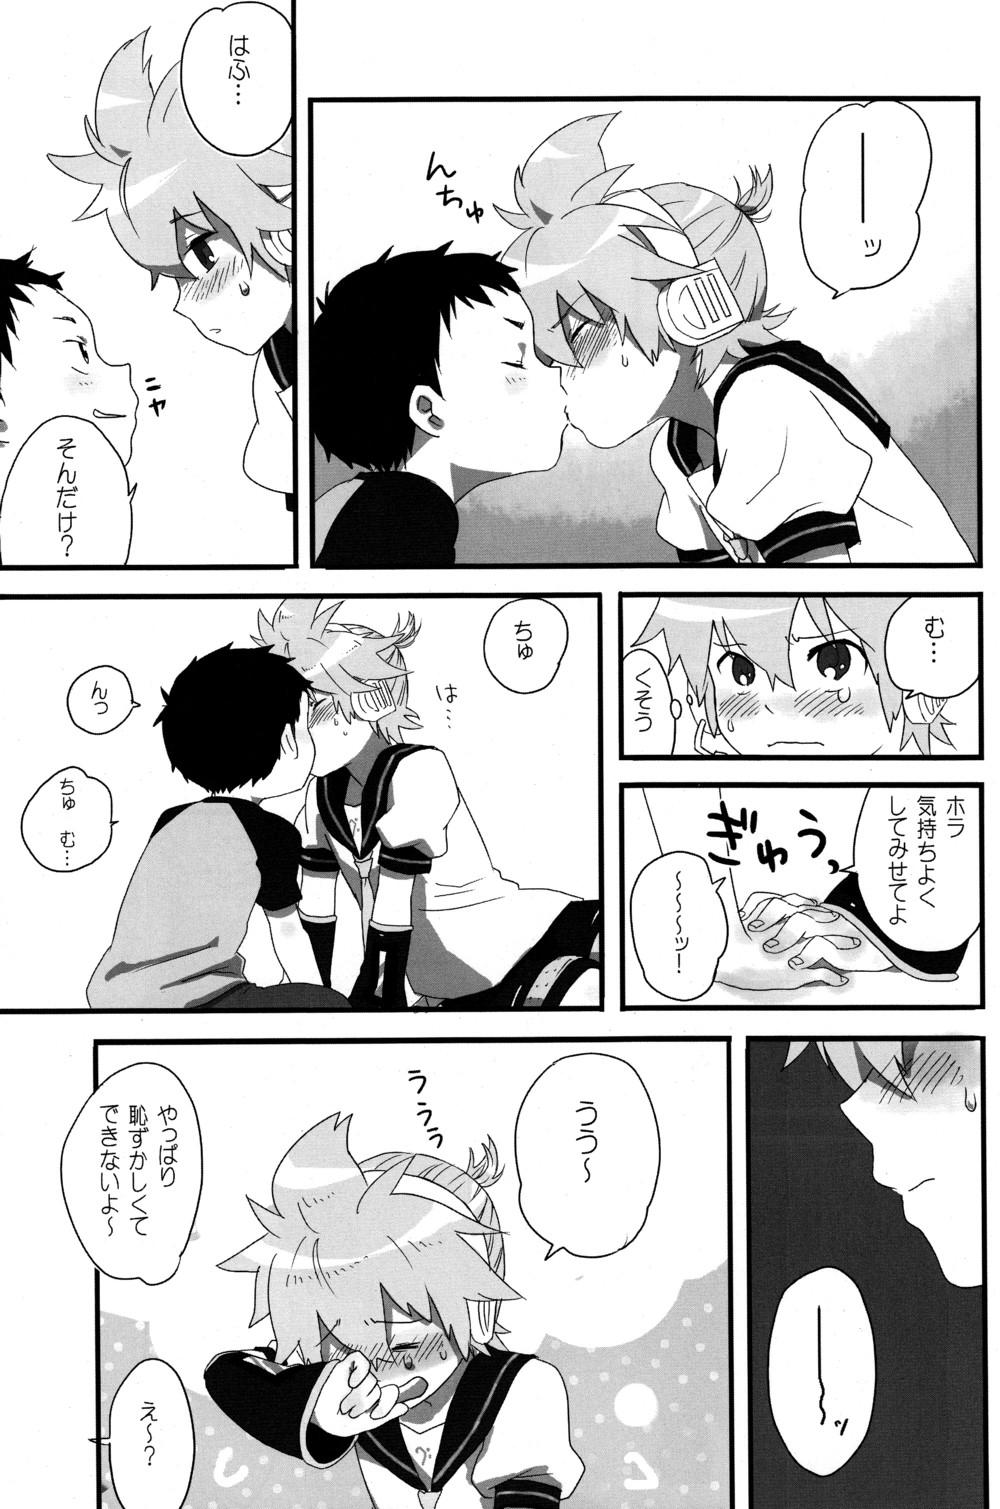 Pussy To Mouth Shota Masu!! 2 - Vocaloid The - Page 7